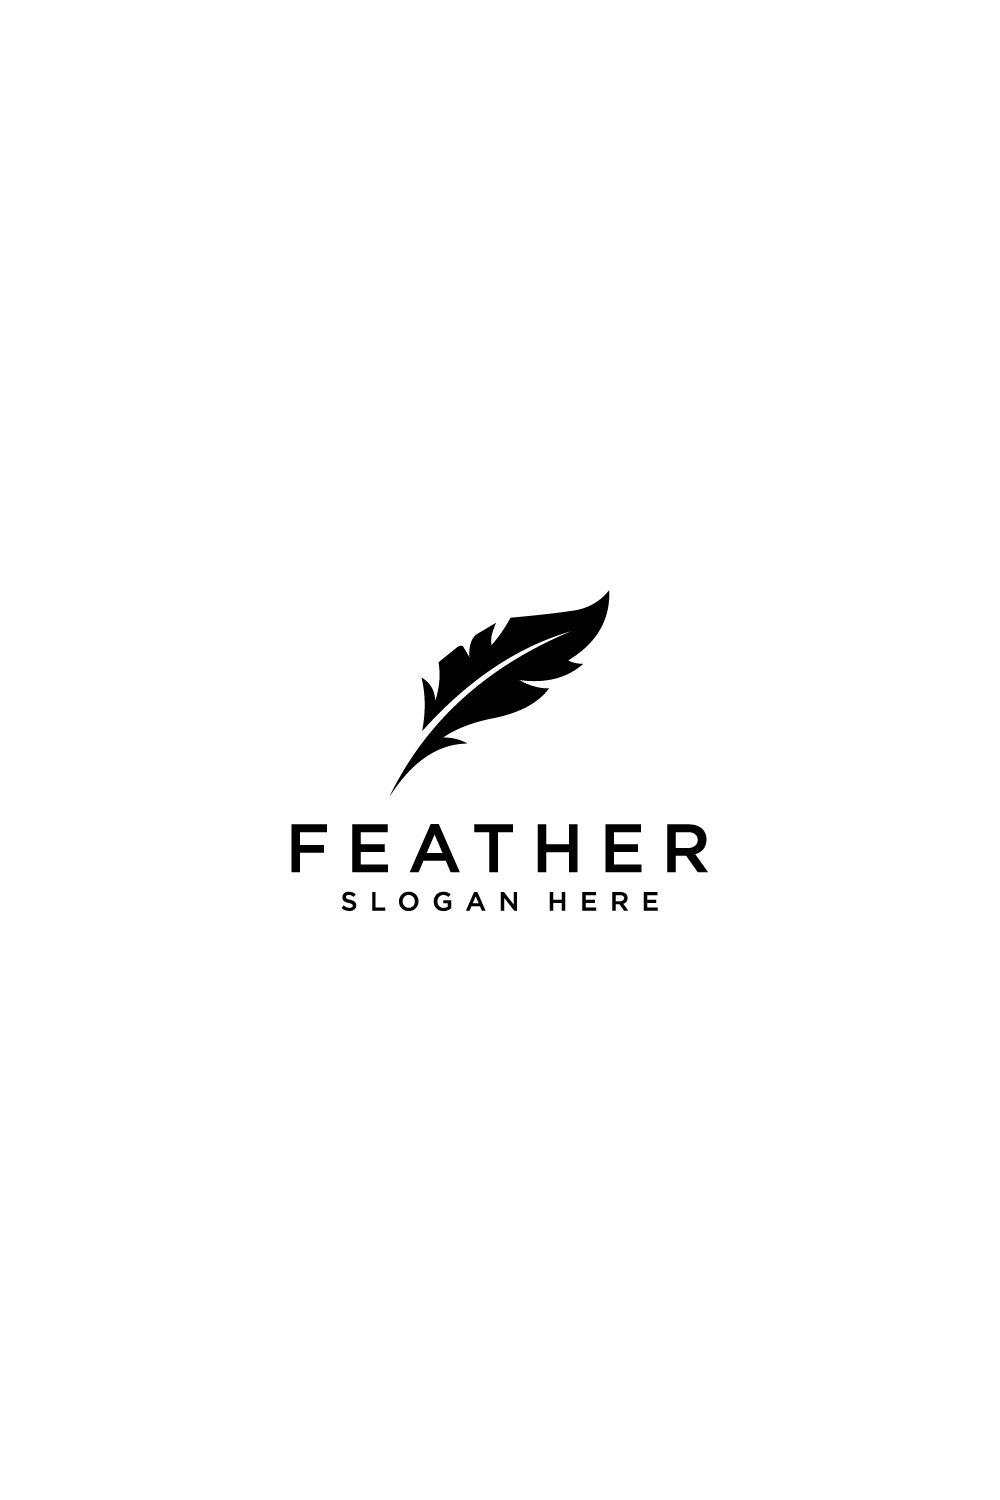 feather silhouette vector design template pinterest preview image.